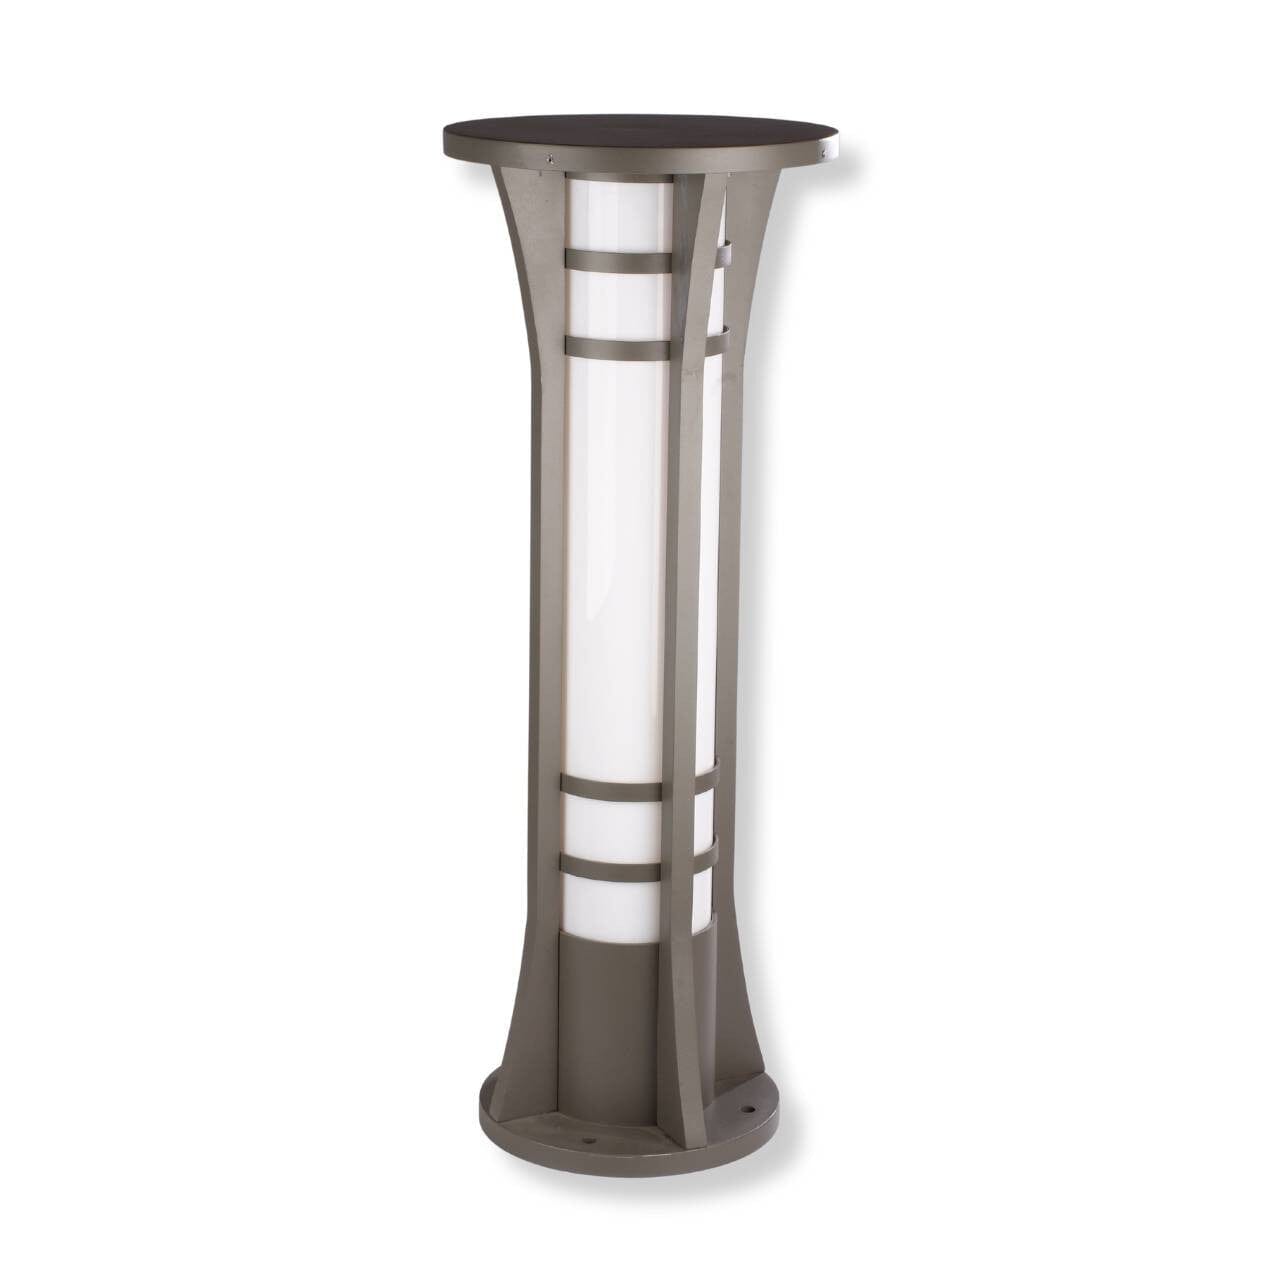 Column Solar Bollard Light - Warm and Bright White Options with Remote